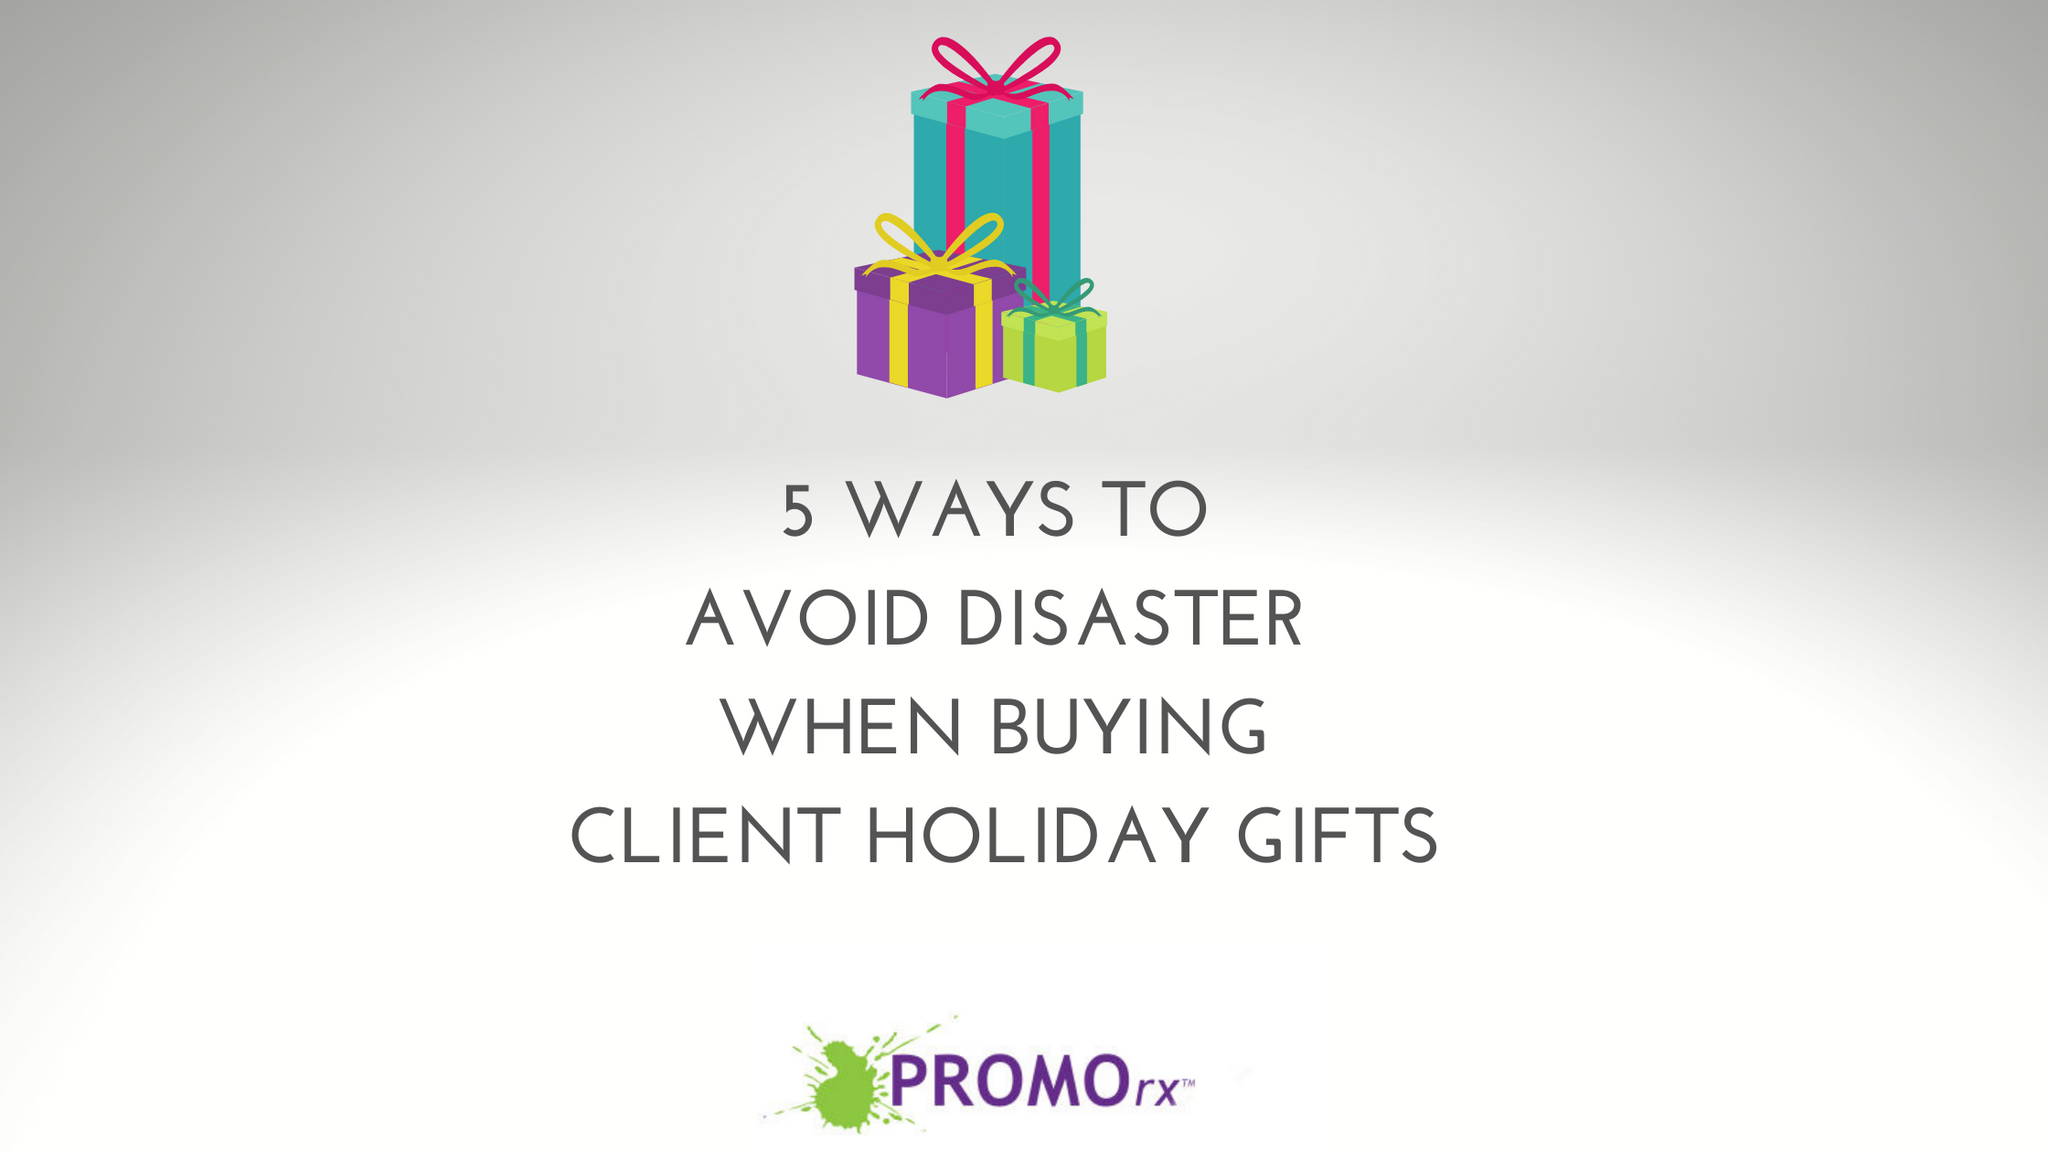 5 Ways to Avoid Disaster When Buying Client Holiday Gifts